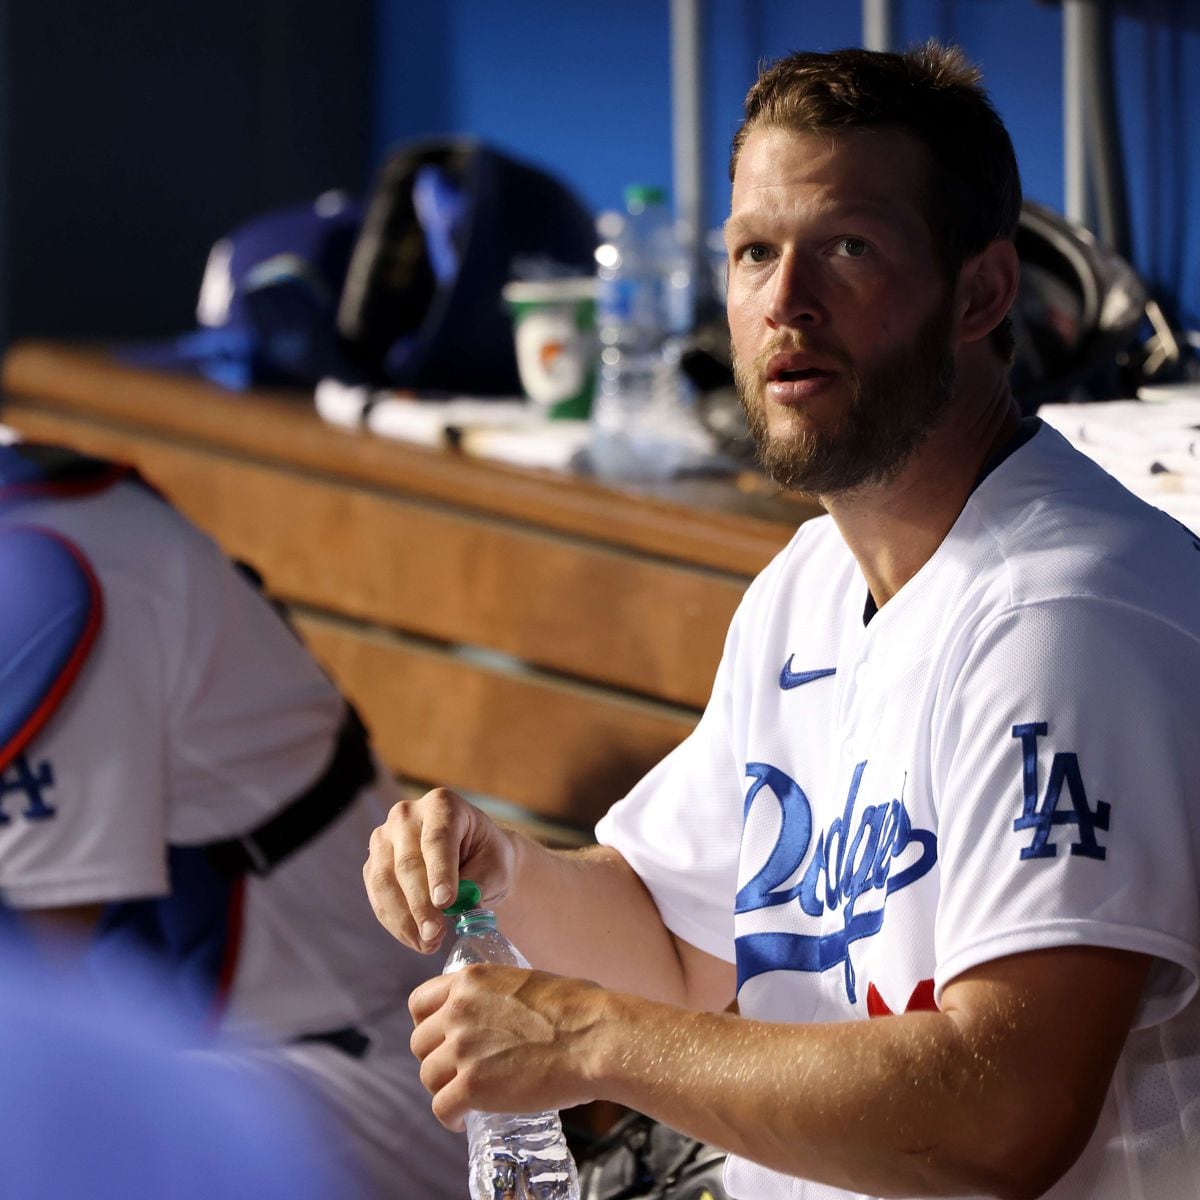 Clayton Kershaw history: His lone start against the Rangers, in